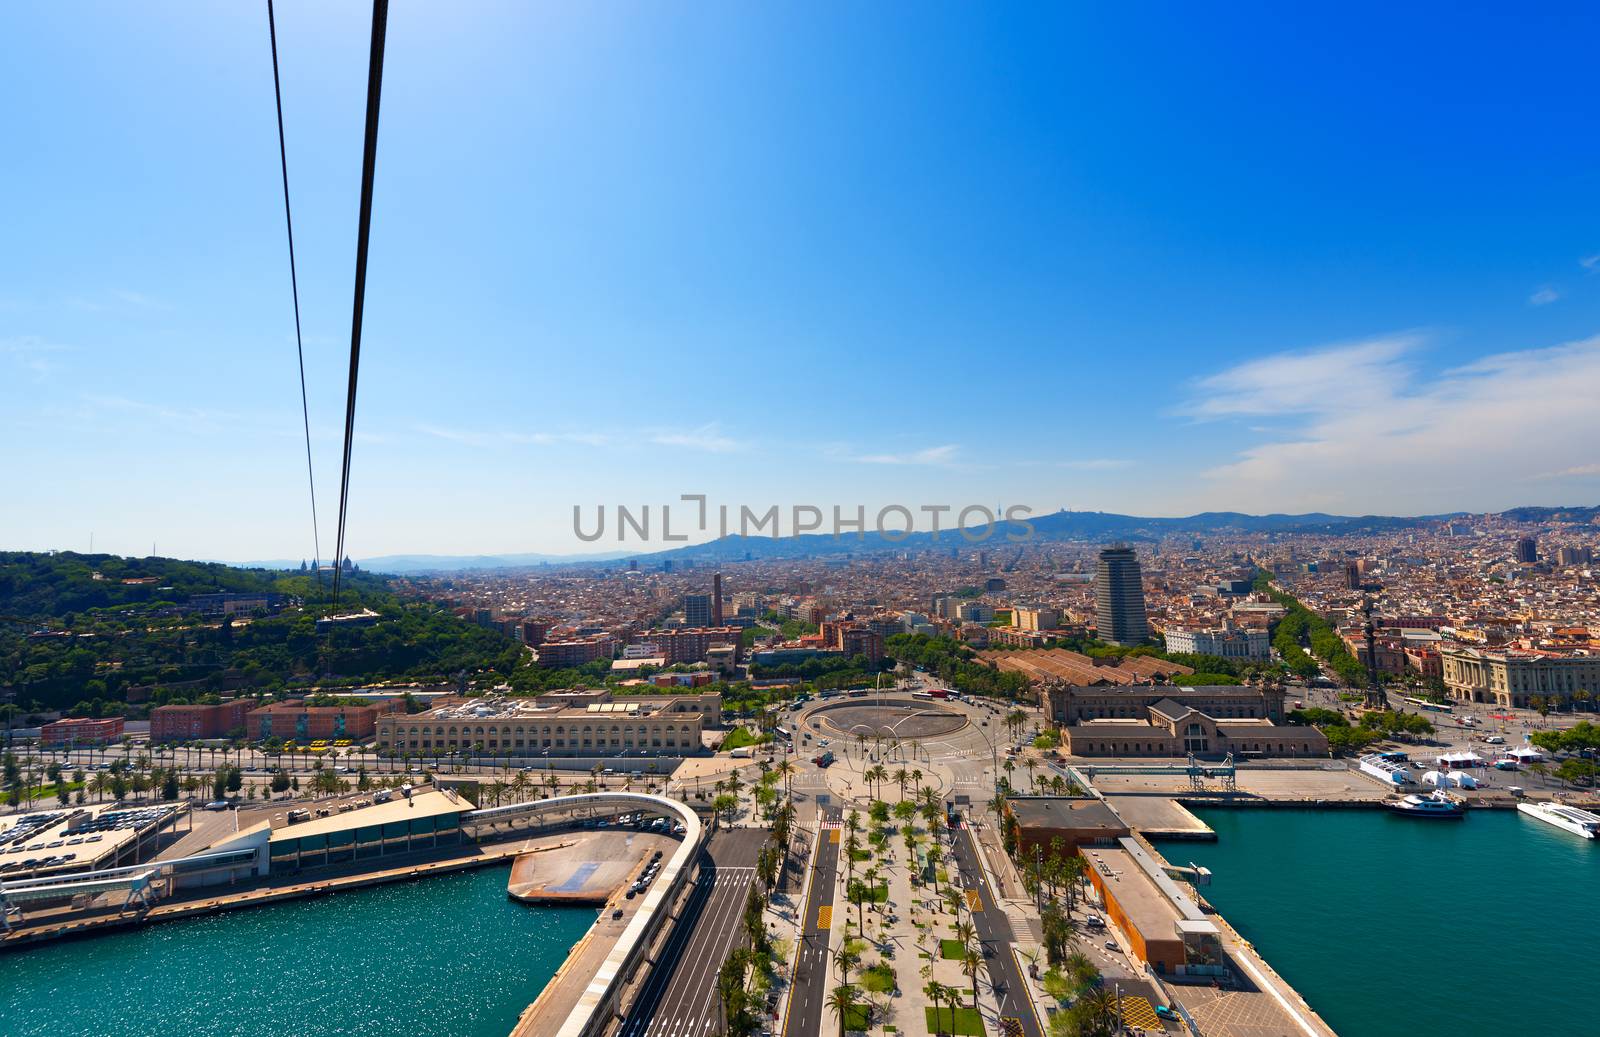 Aerial view of the harbor district in Barcelona, Spain. Seen from the cable car of the Montjuic hill